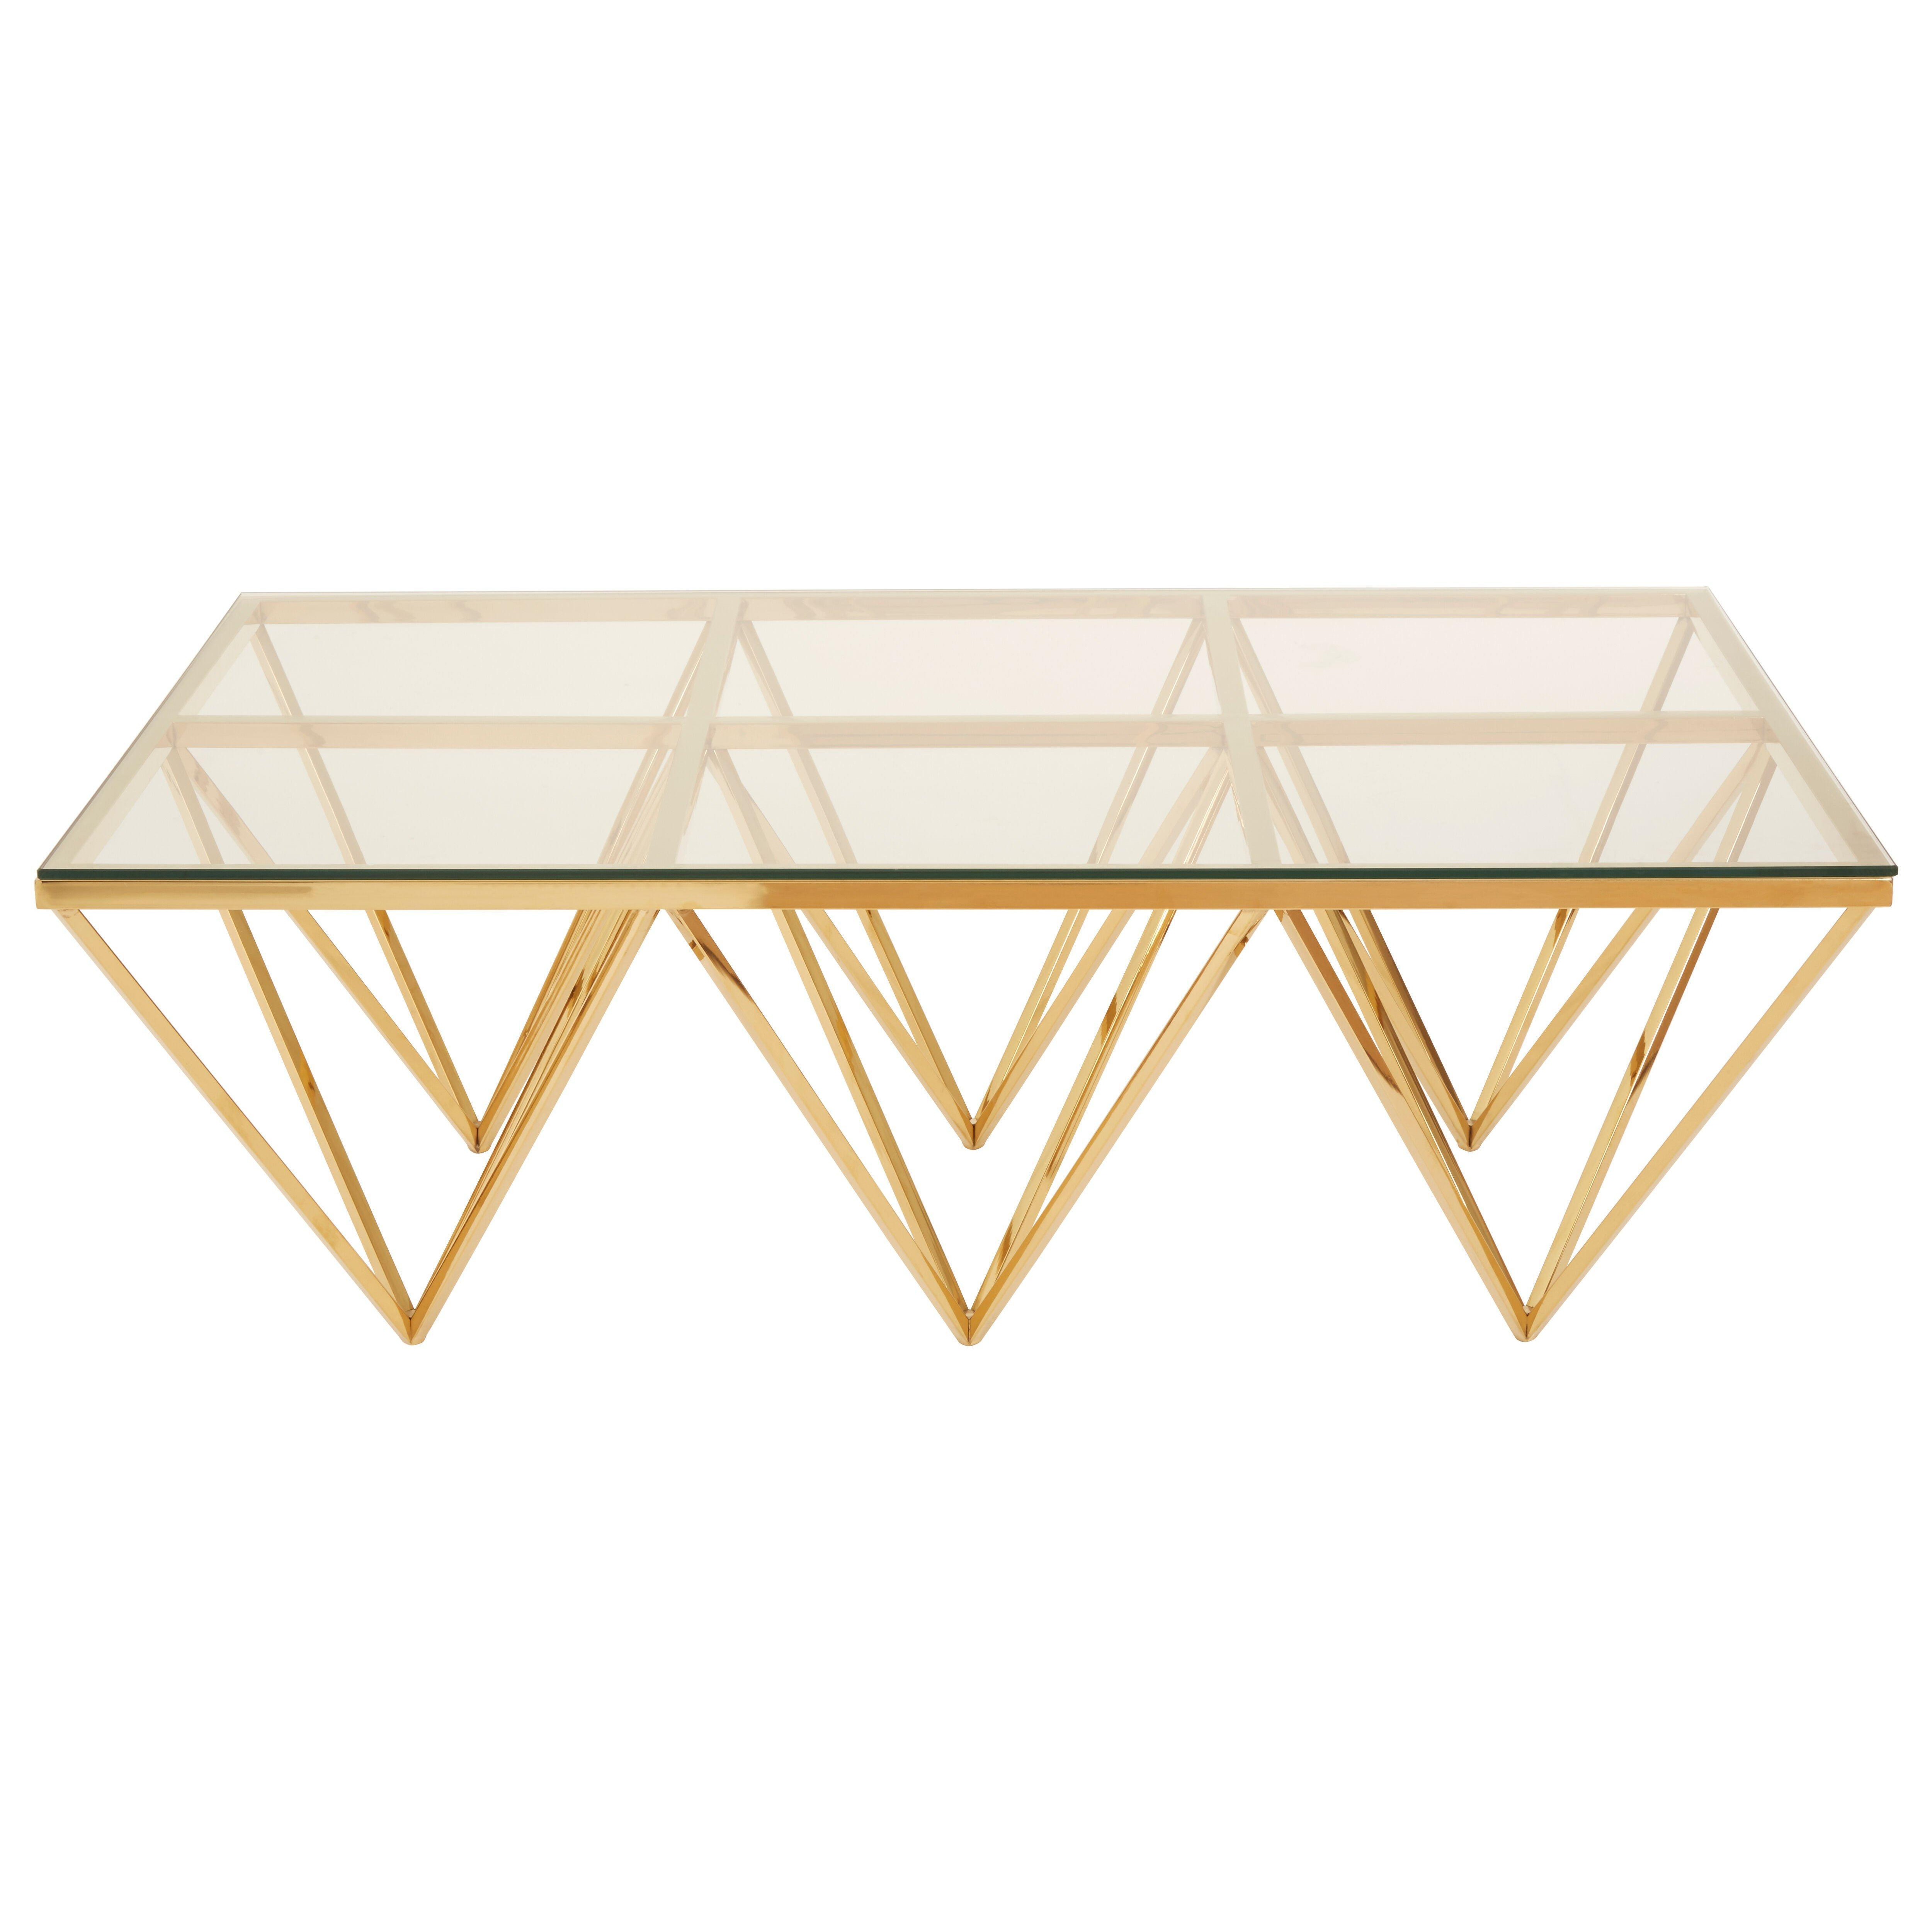 Unique Design Gold Finish Spike Legs Coffee Table, Durable Decorative Table, Sleek Display Coffee Table - image 1